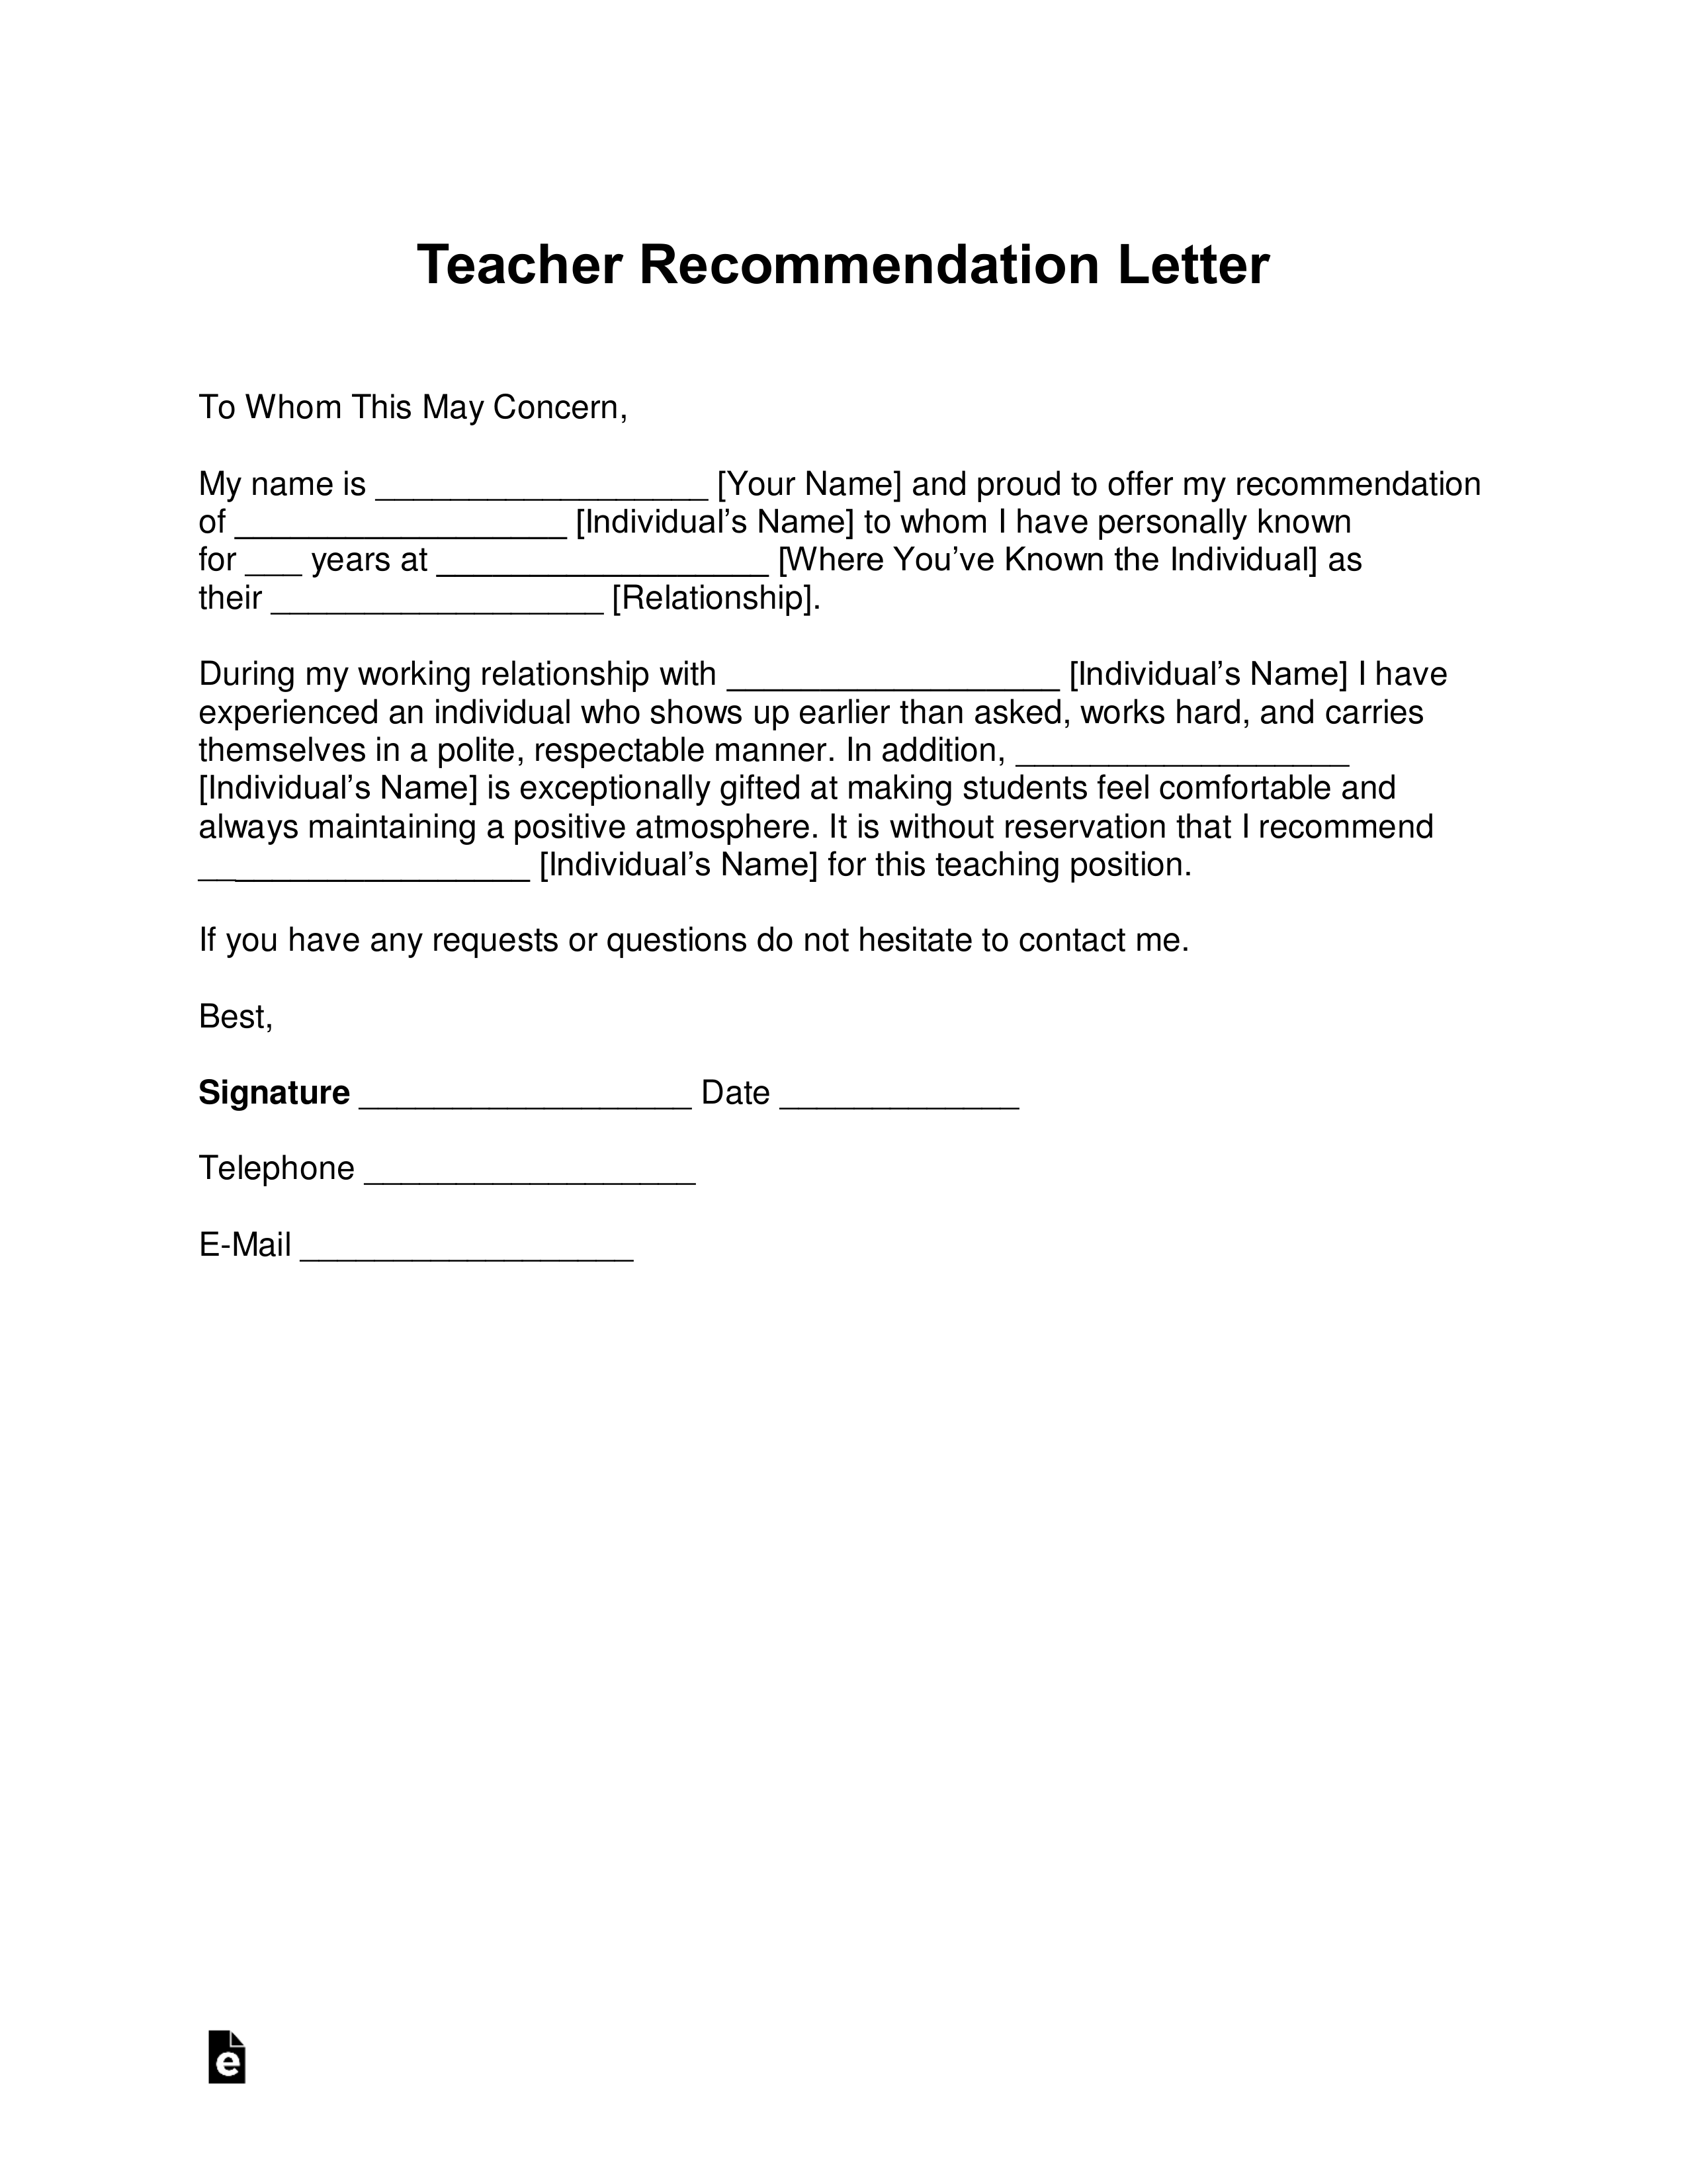 Letter Of Recommendation For Child Care Director from eforms.com